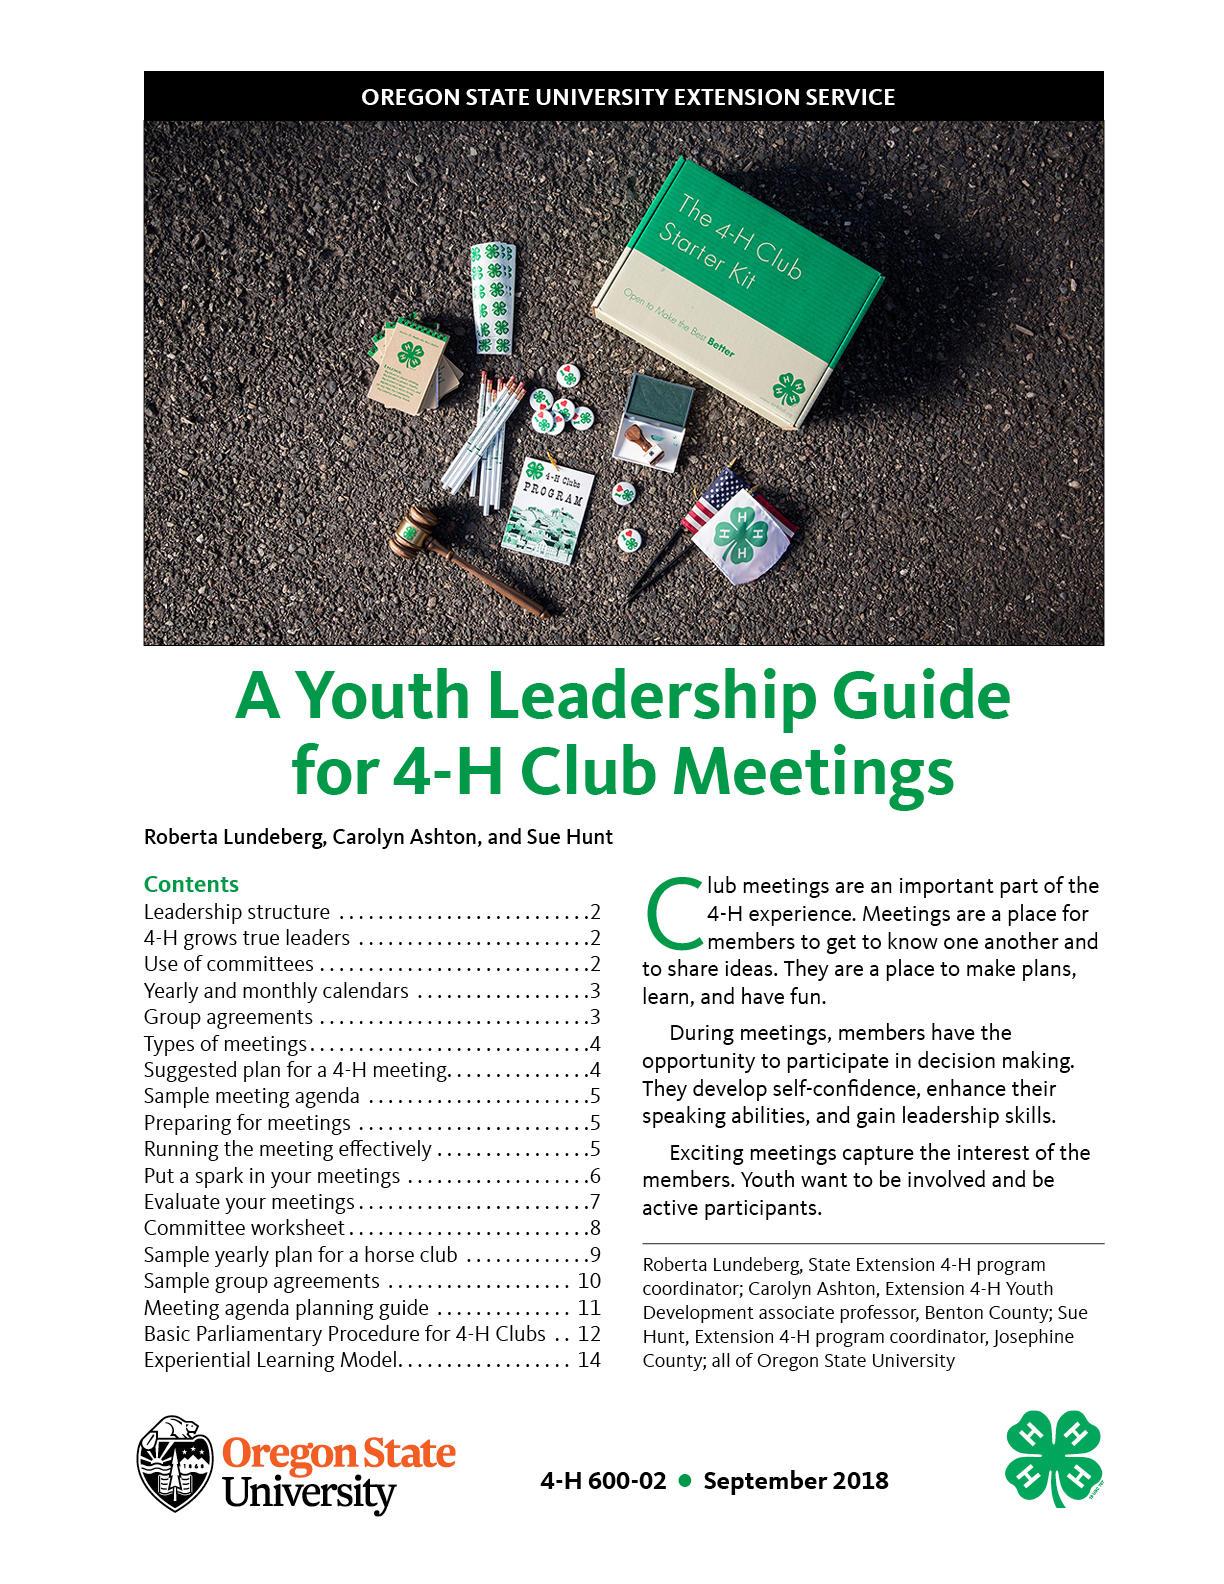 Cover image of "A Youth Leadership Guide for 4-H Club Meetings" publication